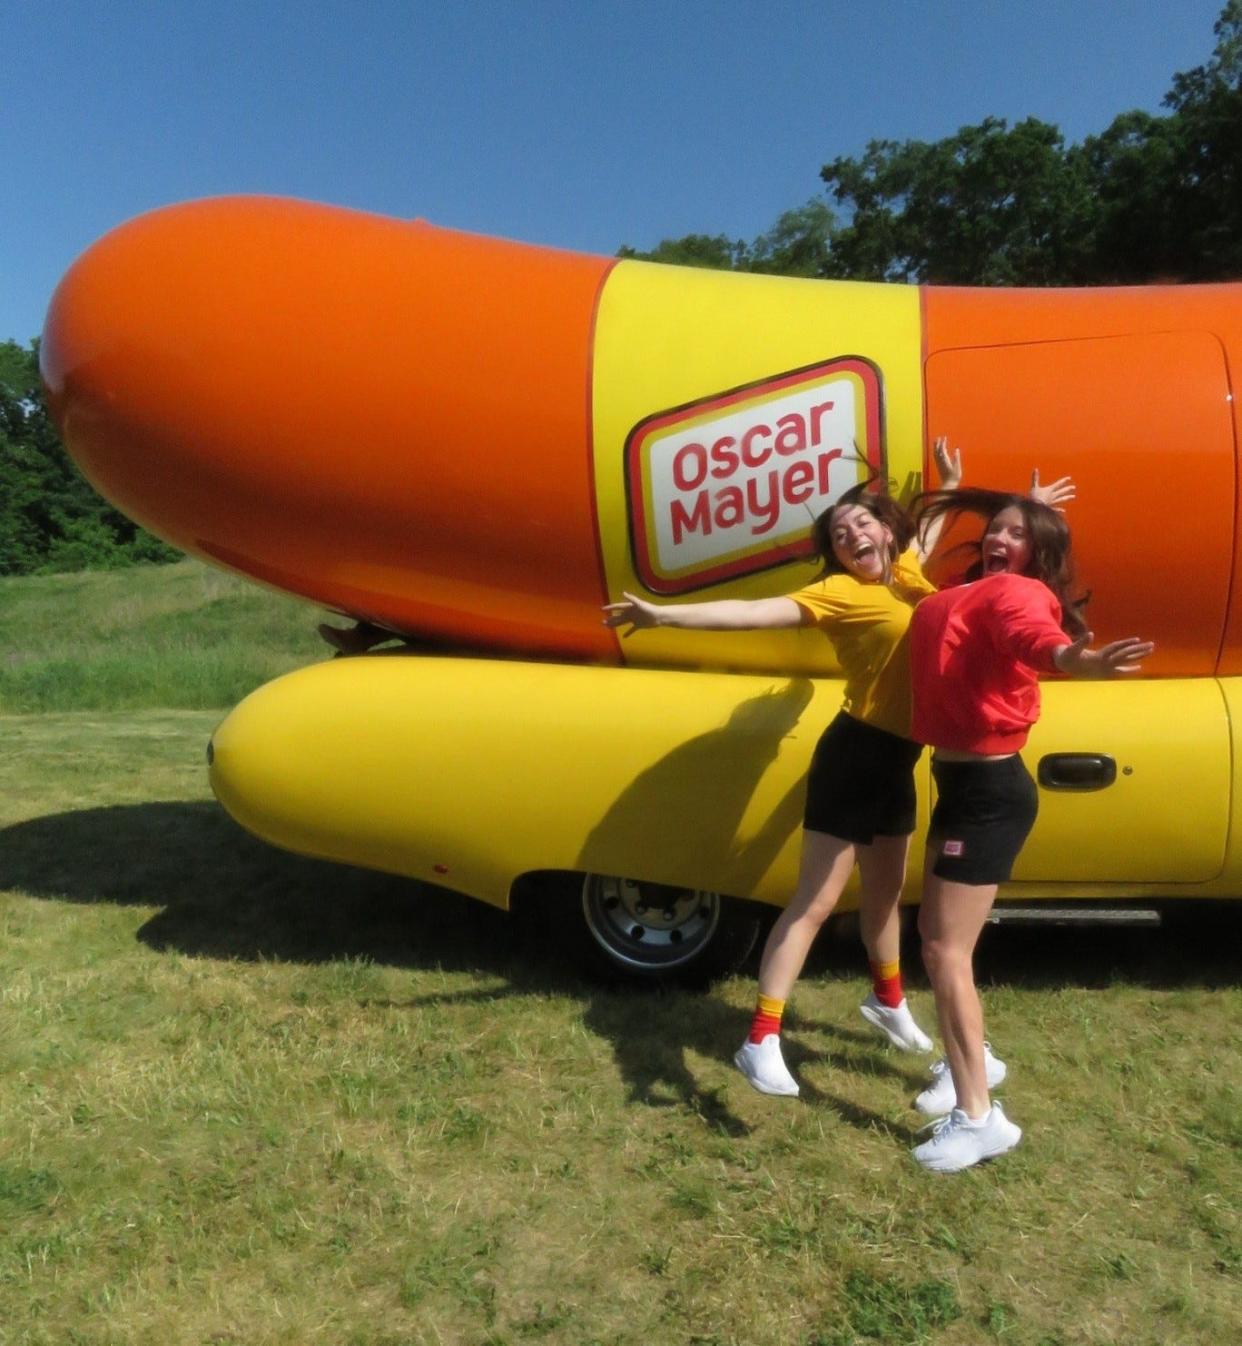 From left to right, Oscar Mayer Wienermobile co-pilots Chloe Van Caeseele aka Chlo-wienie and Mary Clare Kammer aka Chili-Cheese MC strike poses.